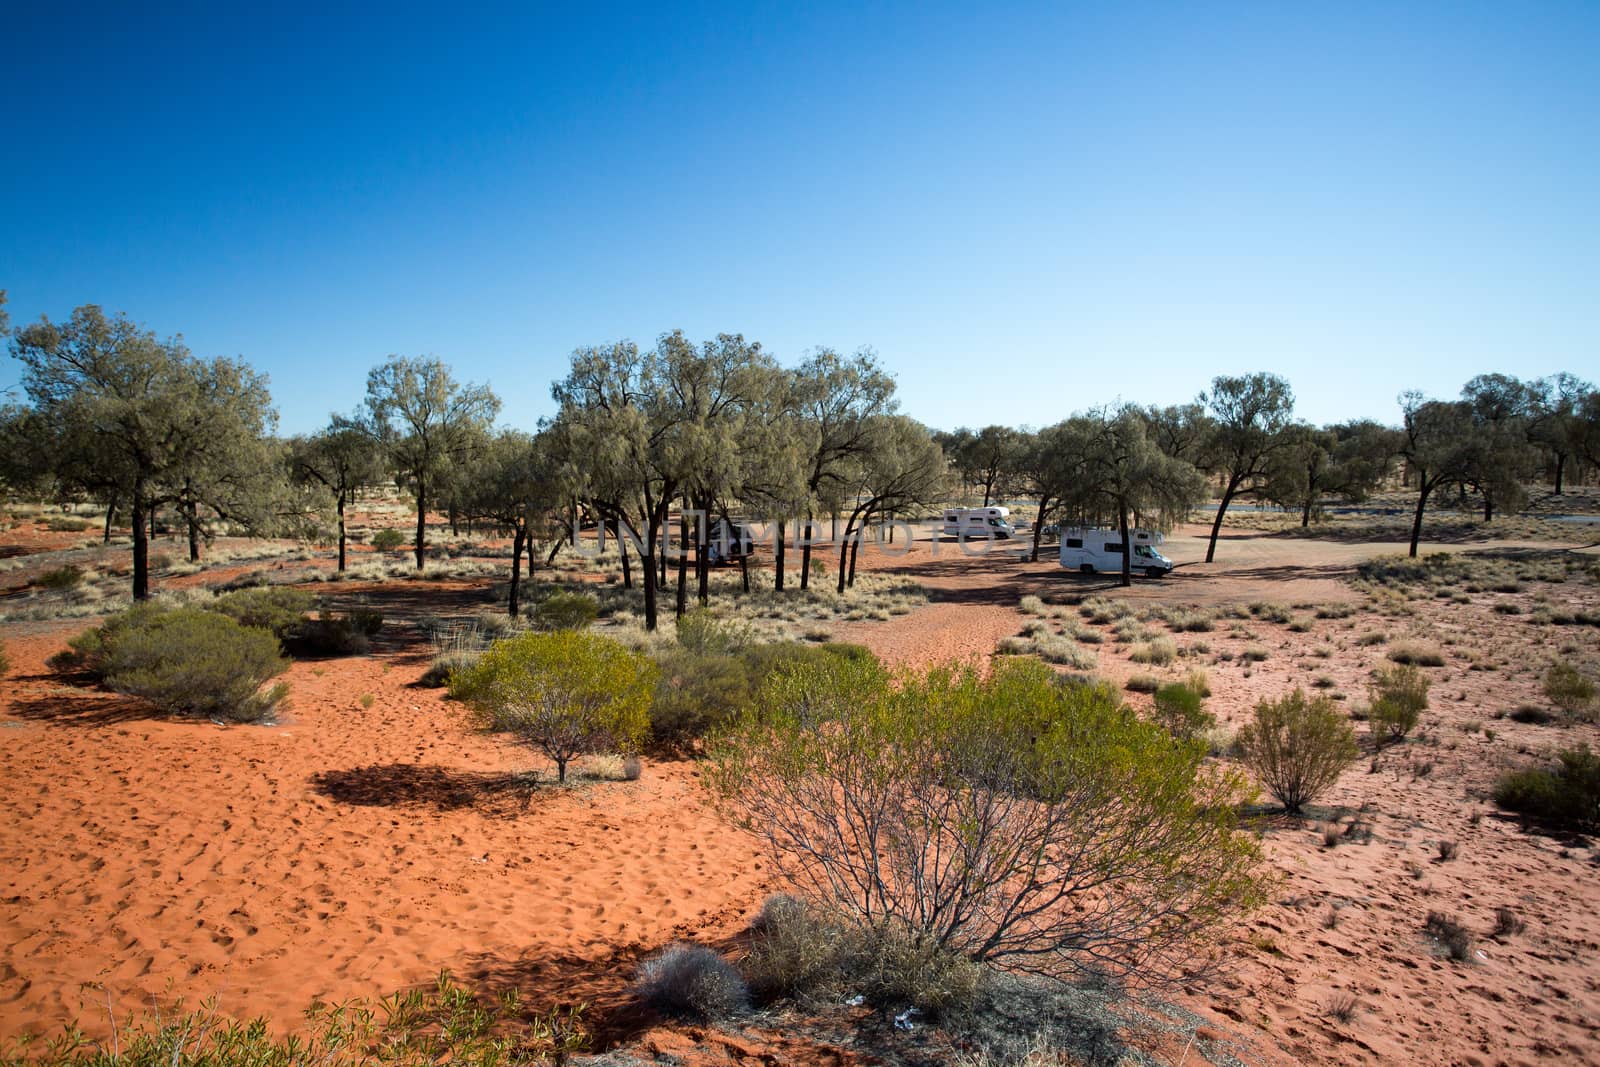 Outback Landscape in Northern Territory Australia by FiledIMAGE